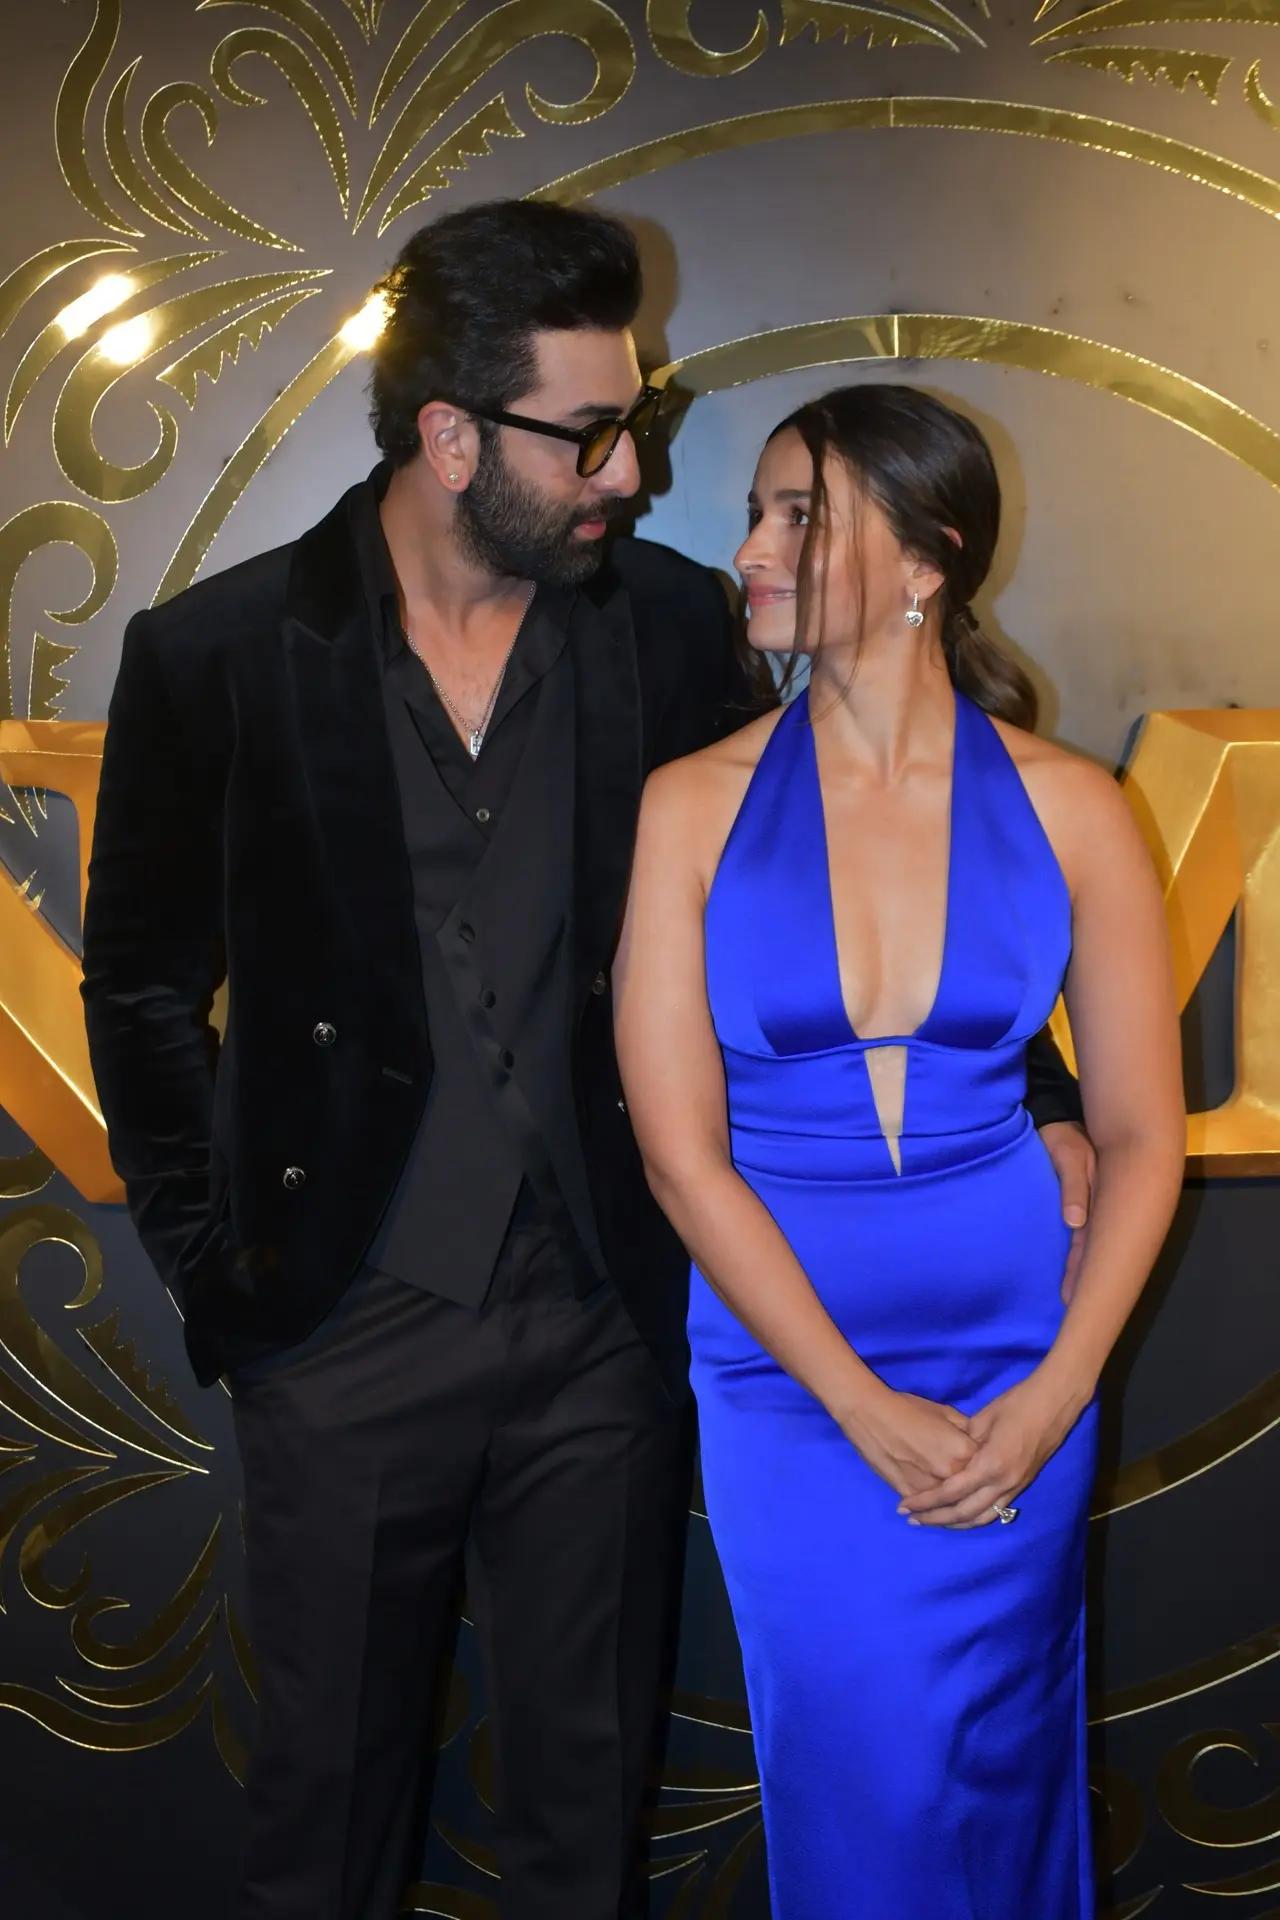 Alia Bhatt and Ranbir Kapoor stunned on the night of Animal success party. Alia Bhatt donned this beautiful blue dress which featured a plunging neckline. While Ranbir Kapoor looked dapper in a suit. (Pic/Yogen Shah)